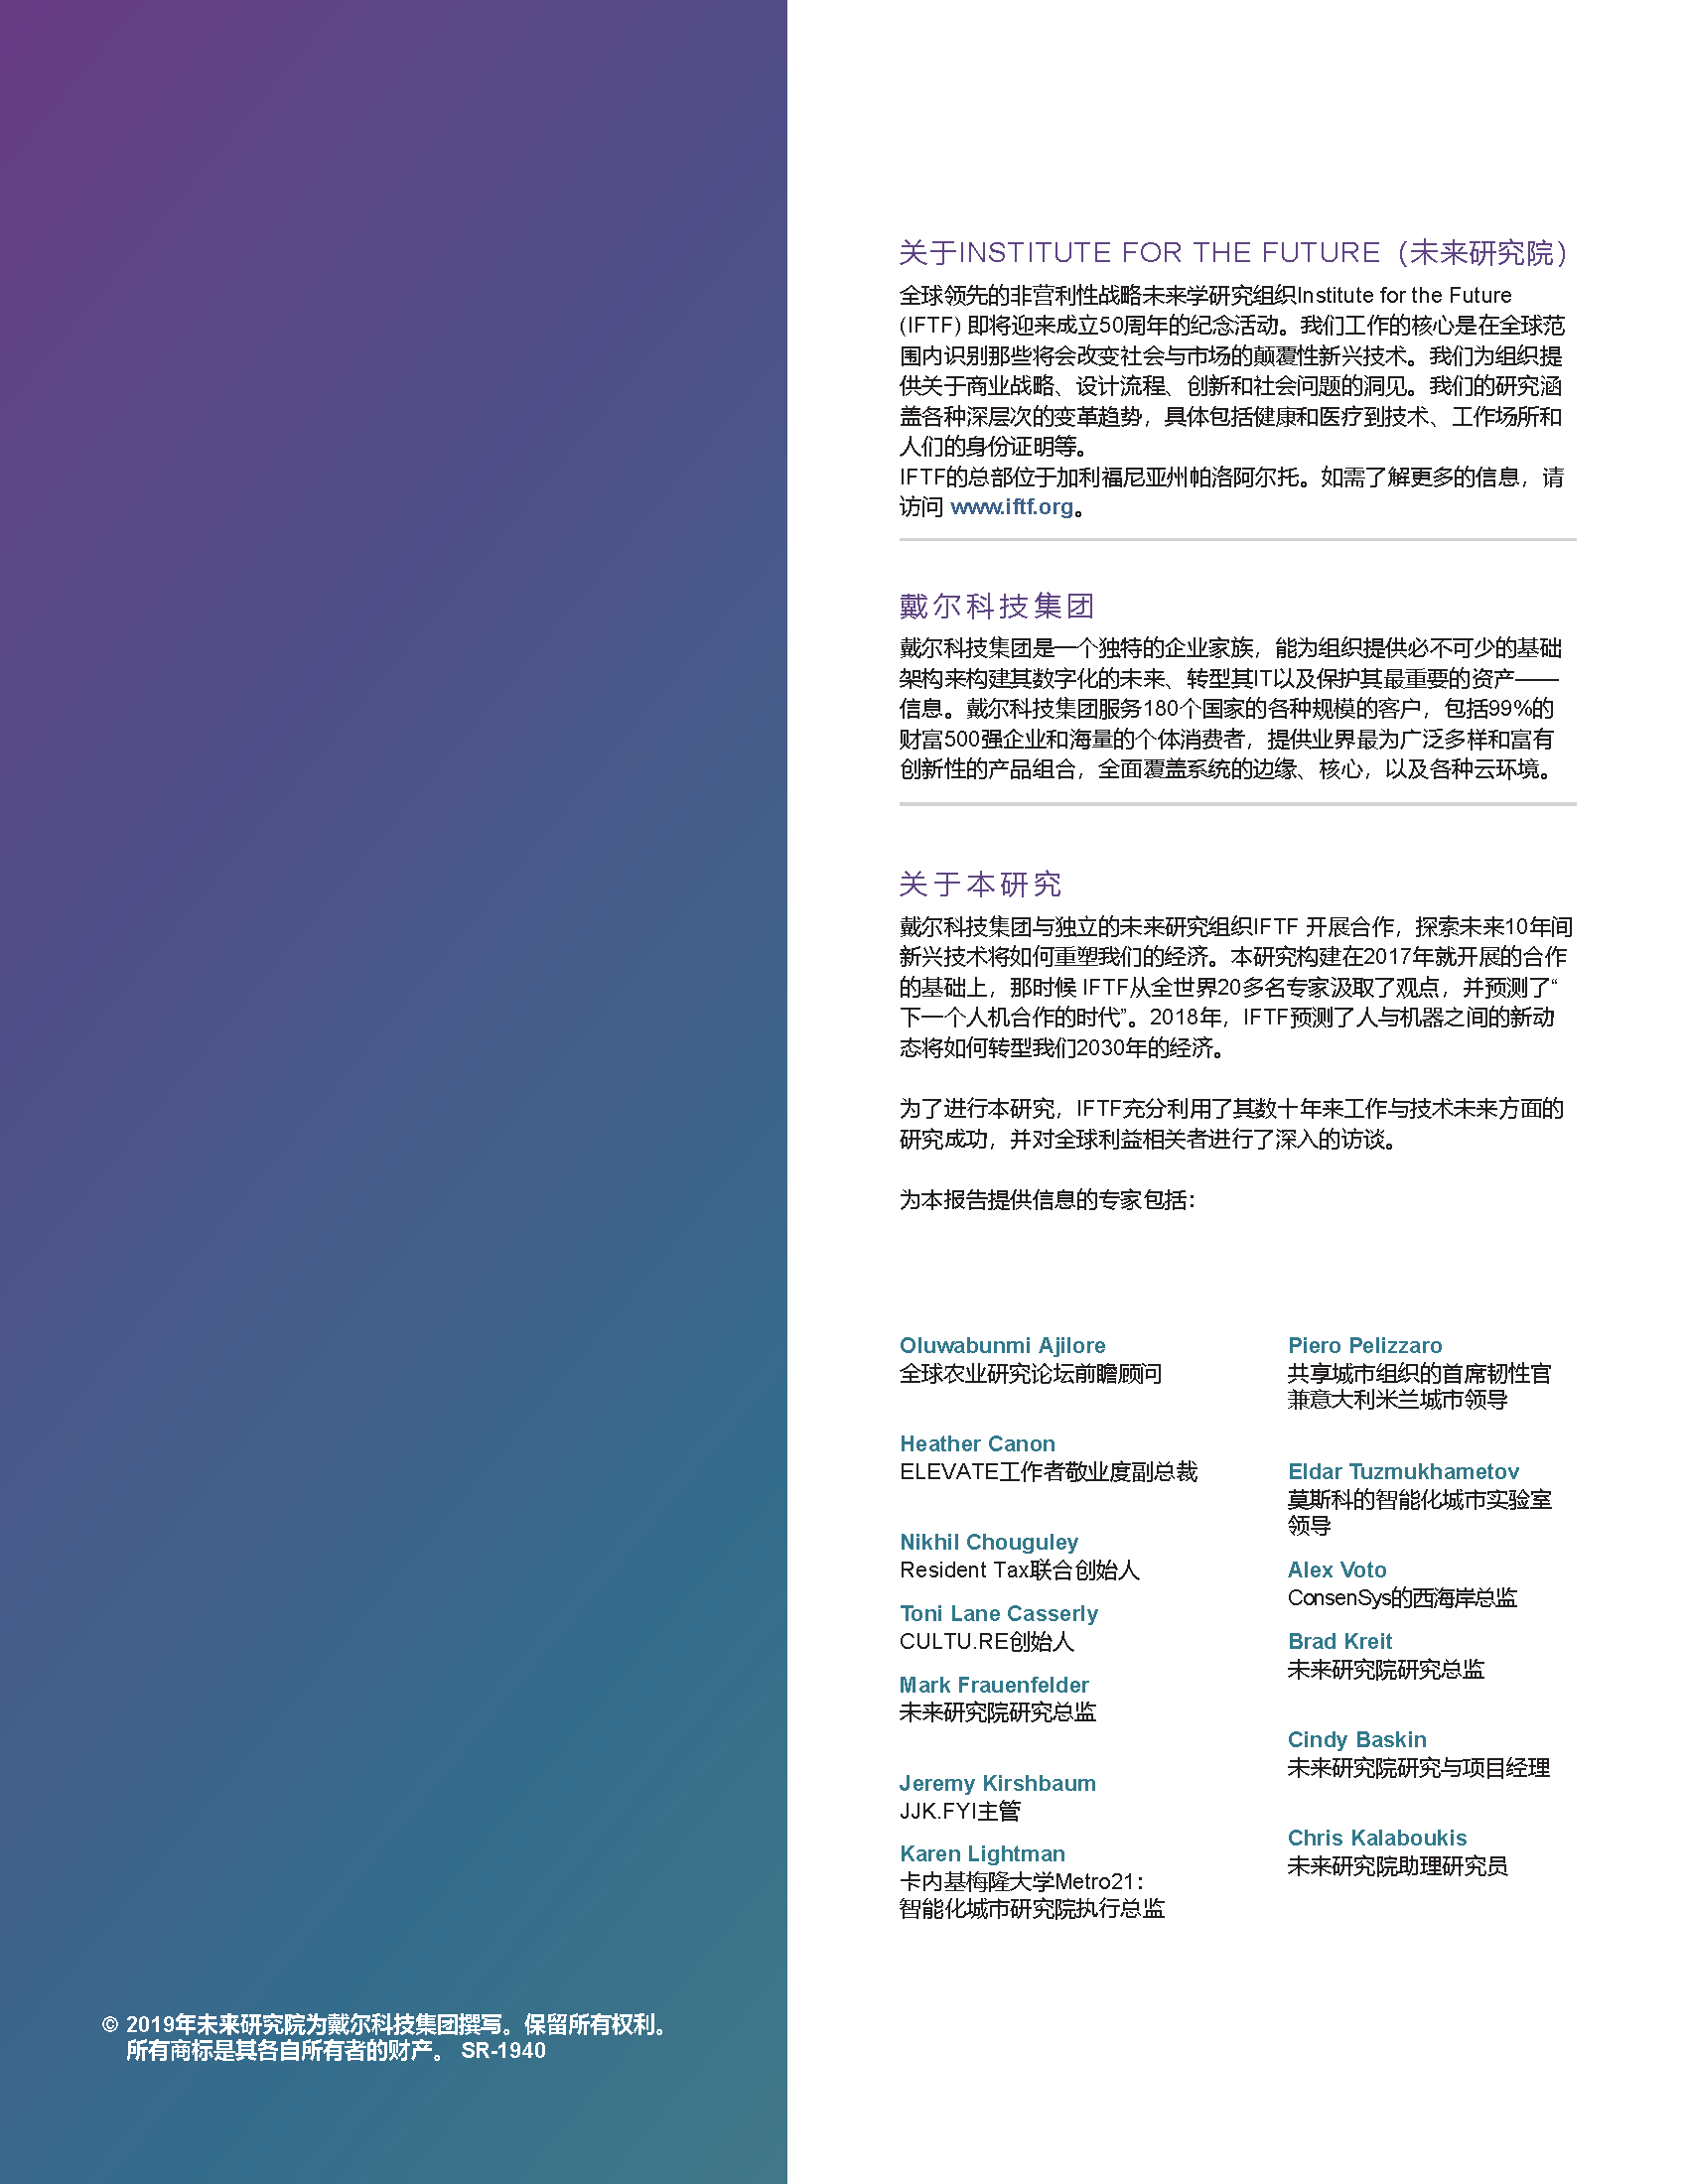 Future-of-the-Economy-Report-by-IFTF-and-Dell-Technologies_CN_页面_02.png